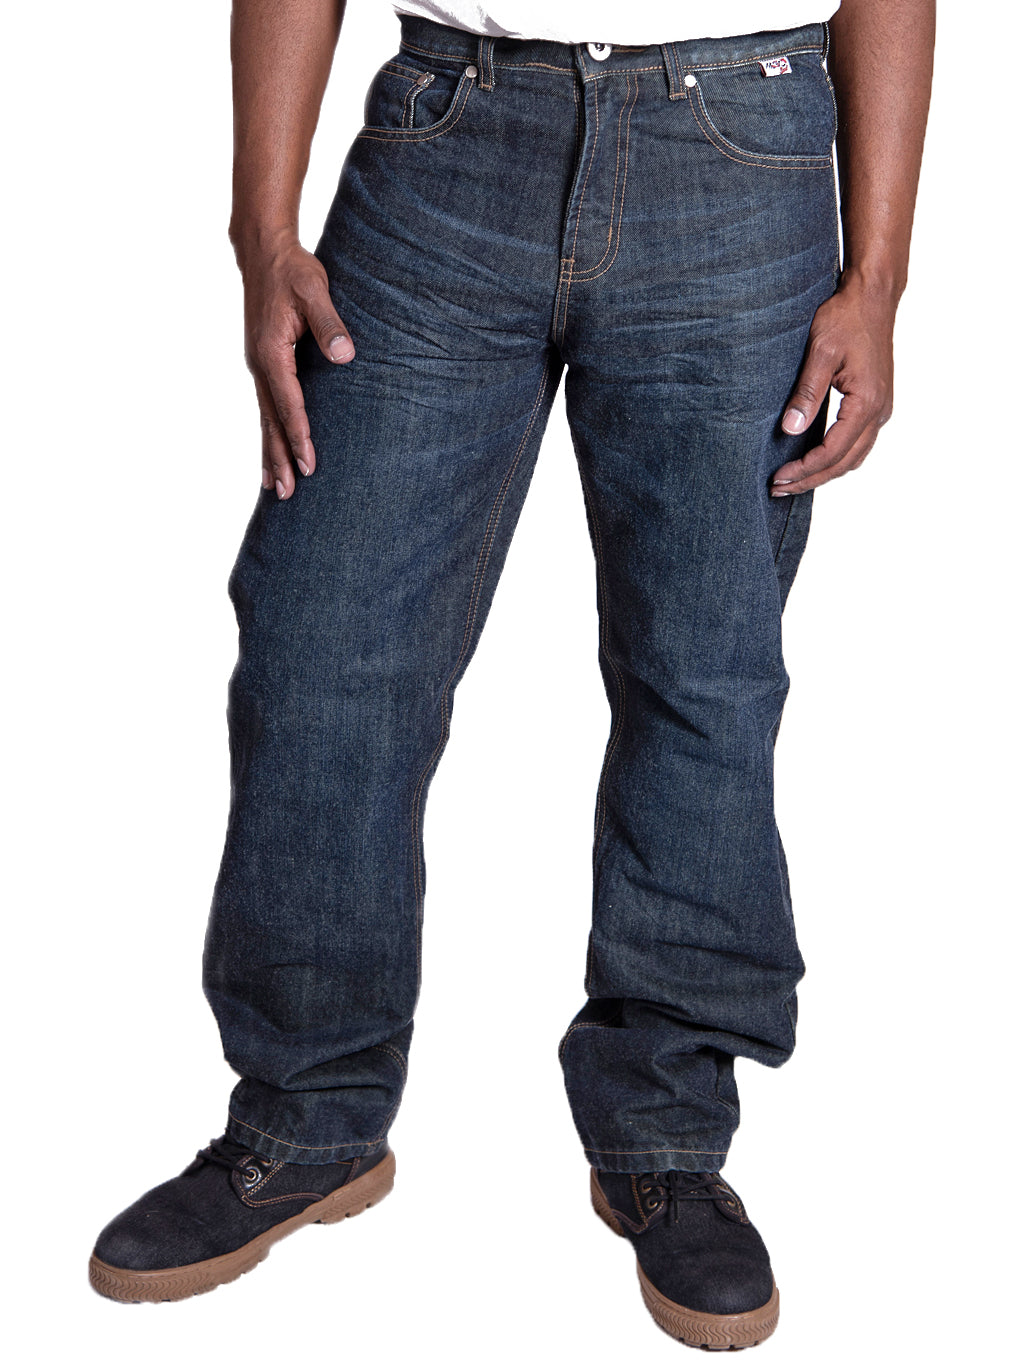 motorcycle protective jeans